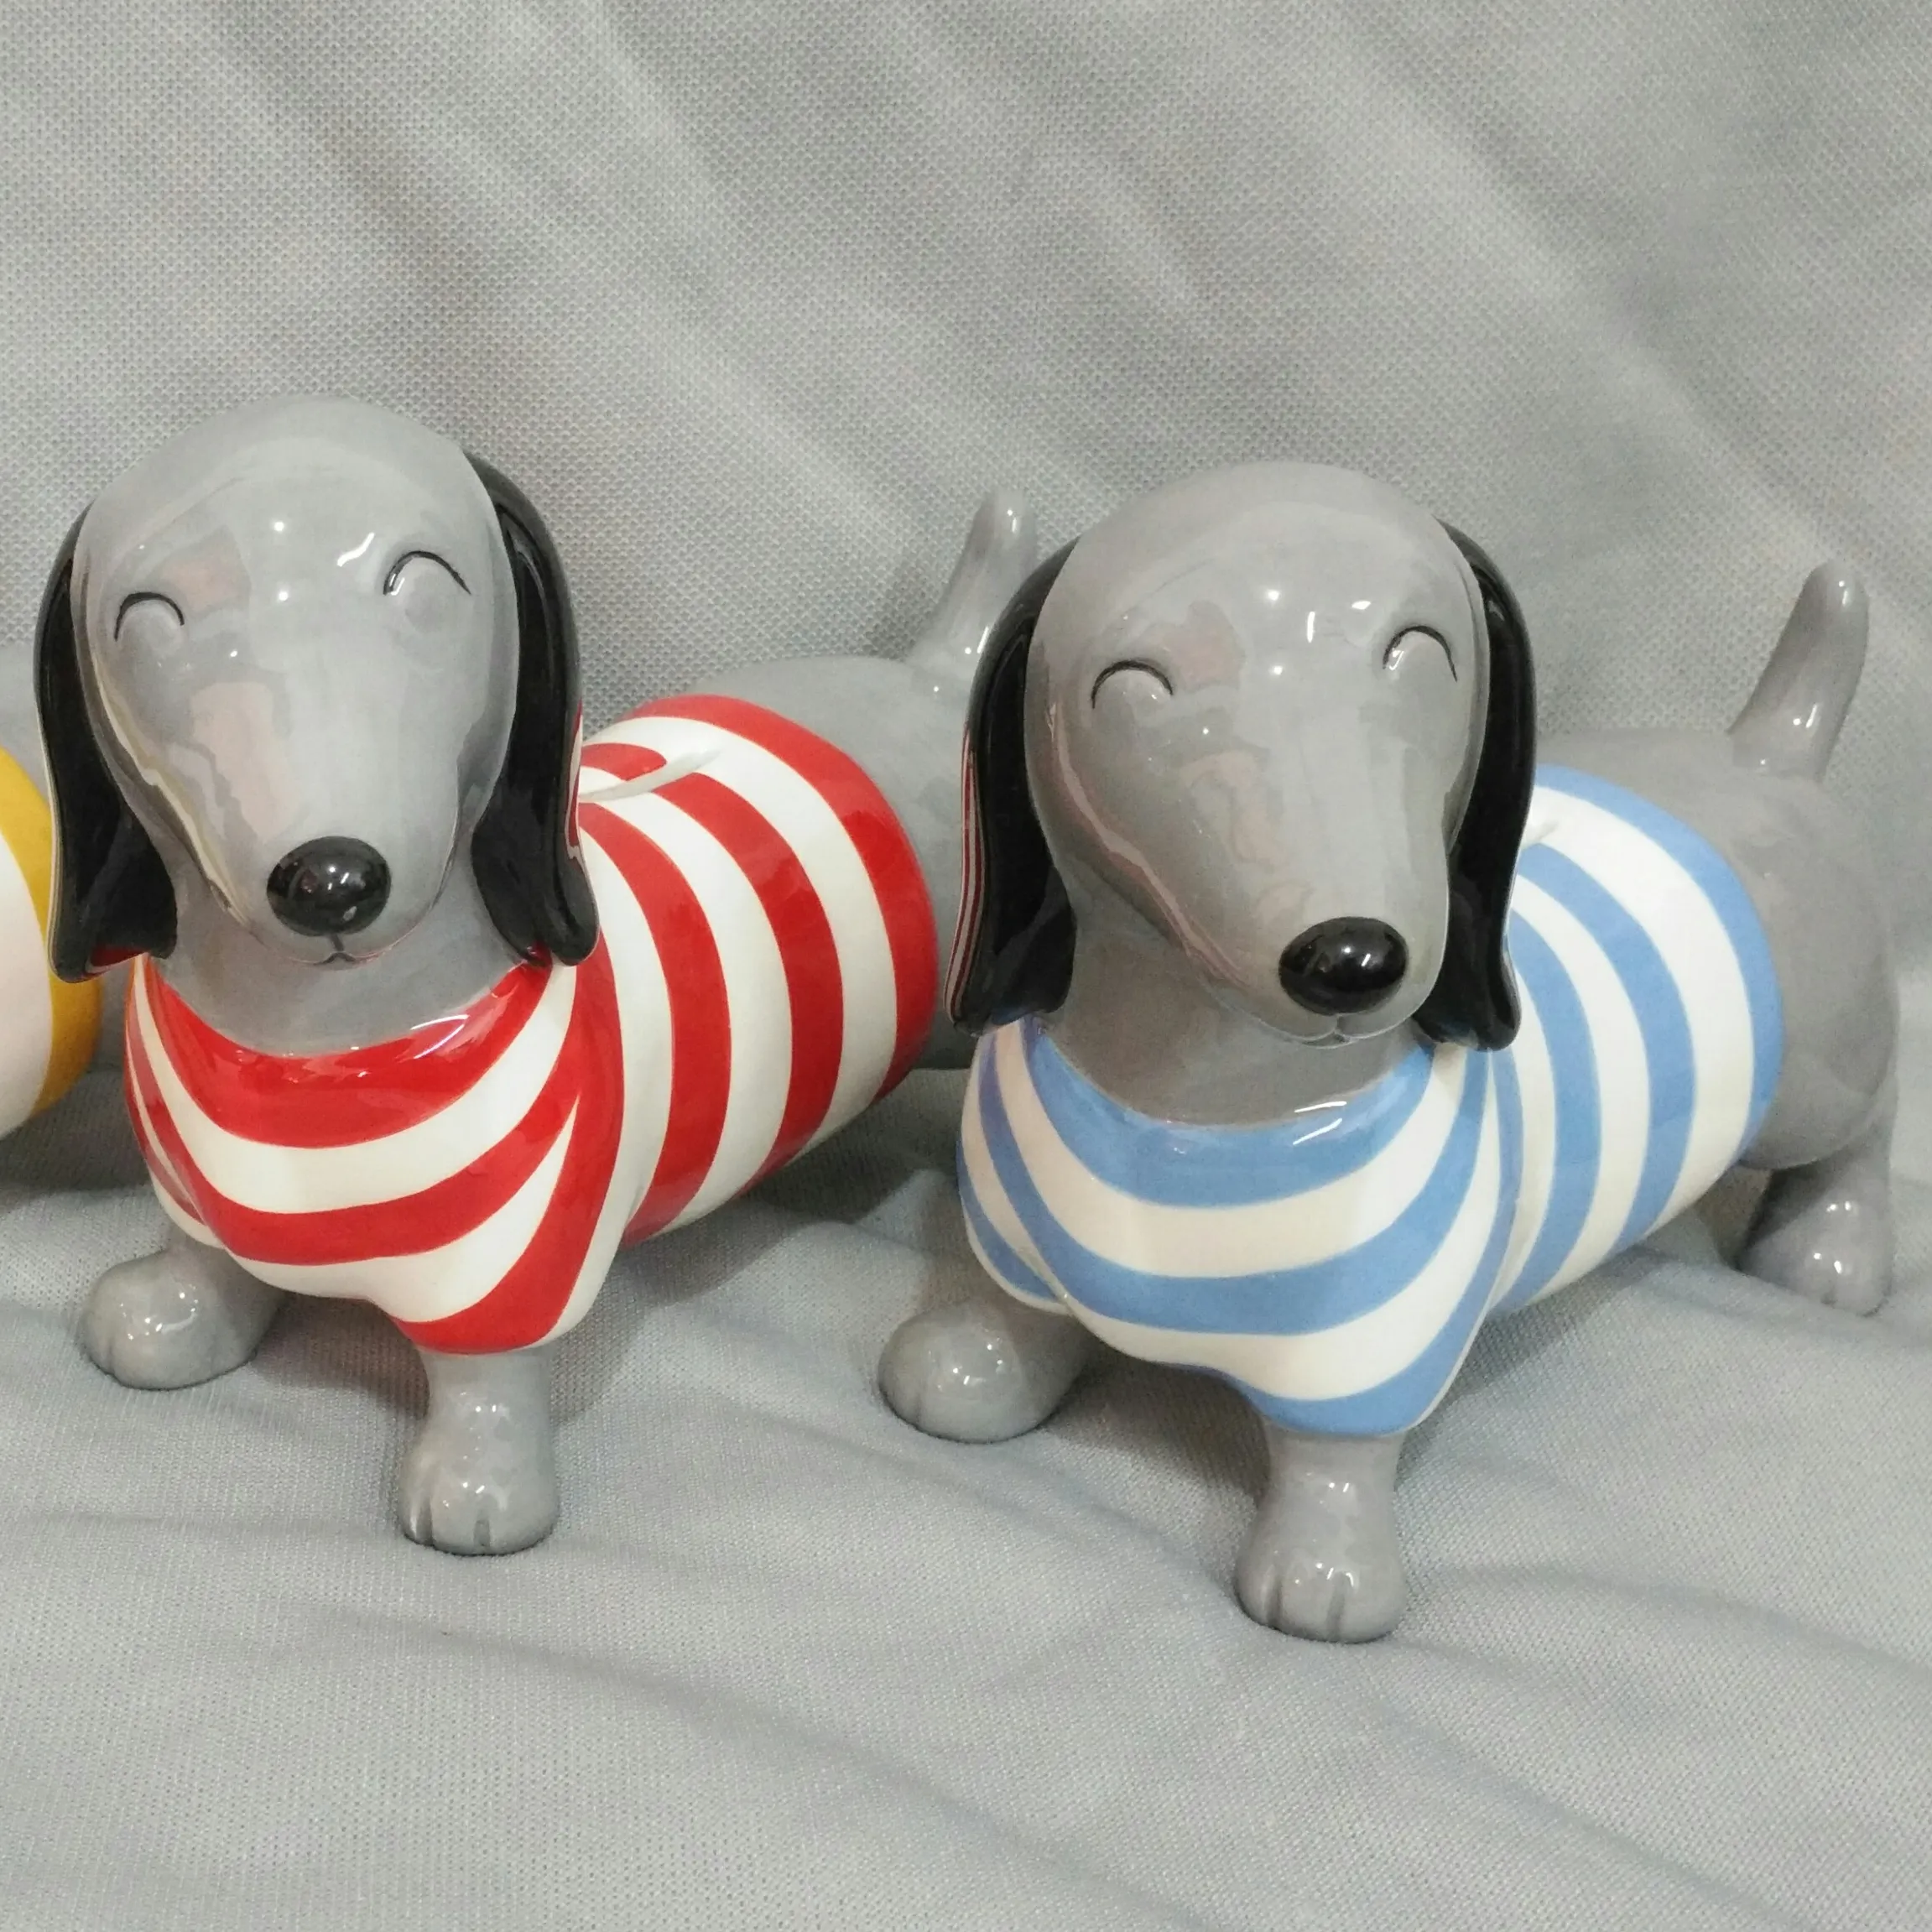 Funny Ceramic Dachshunds Family Wearing Colorful T-Shirt Savings Coin Banks Money Boxes